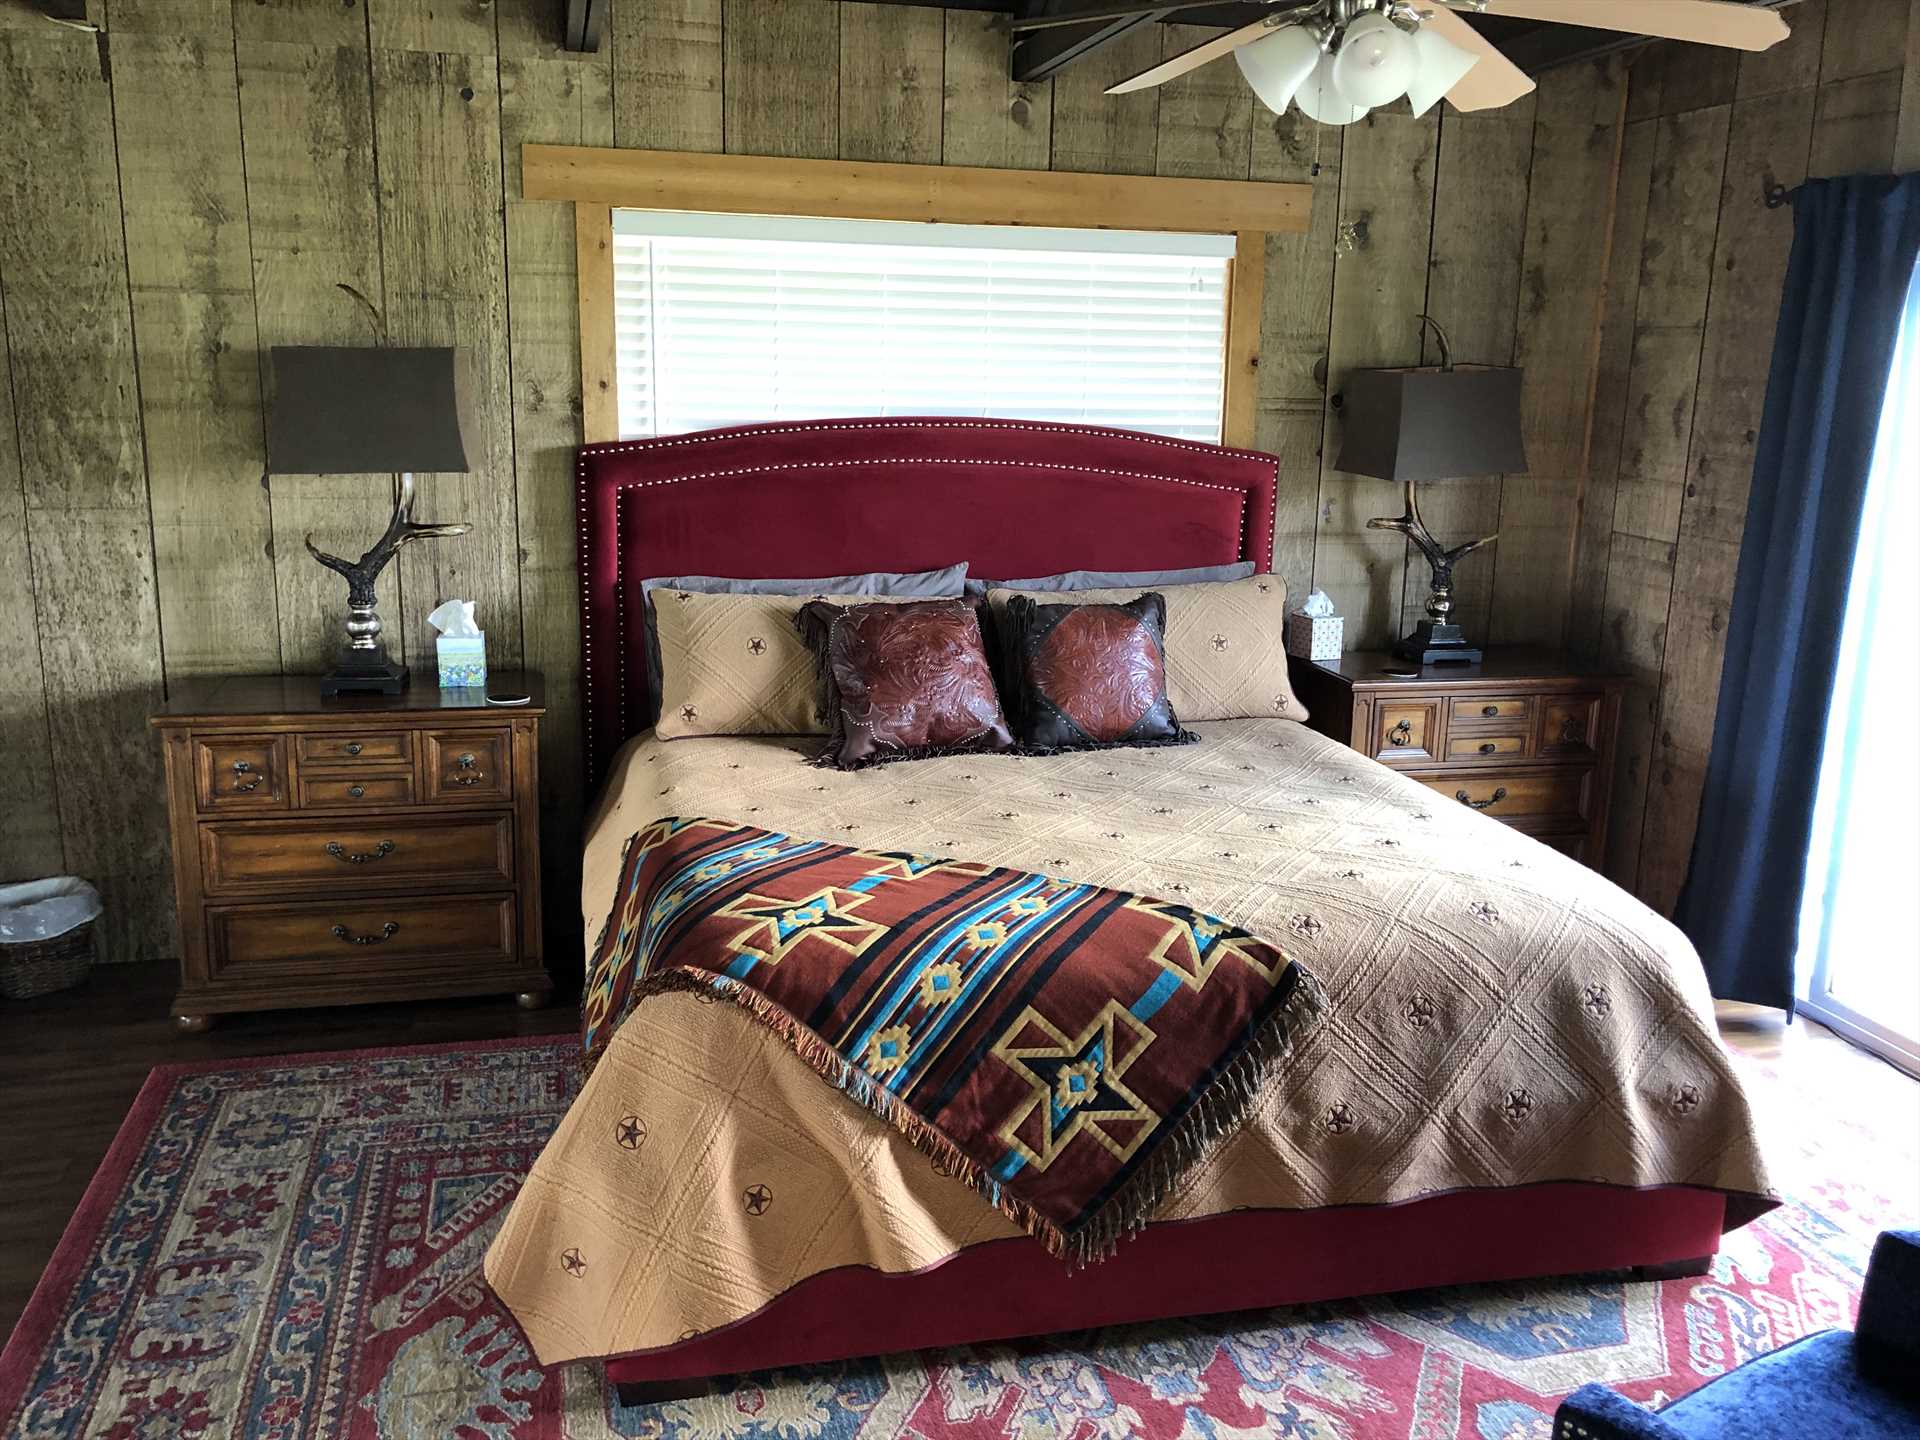                                                 In the master bedroom of the Bluff House, you'll find a comfy and warm king-sized bed, tastefully draped in fresh linens.